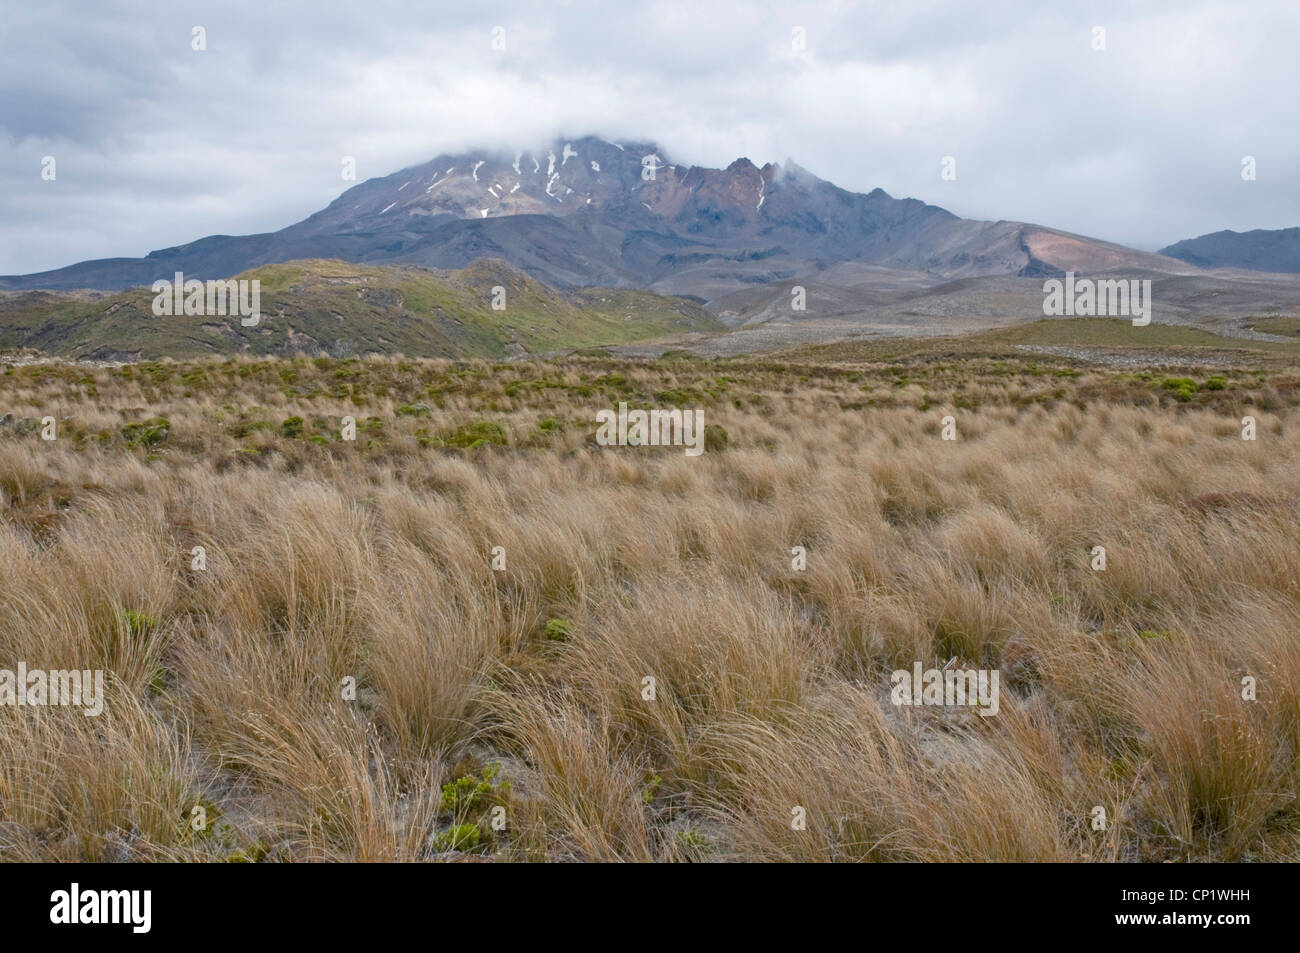 Mount Ruapehu in Togariro National Park, New Zealand, with red tussock grass making an attractive foreground Stock Photo